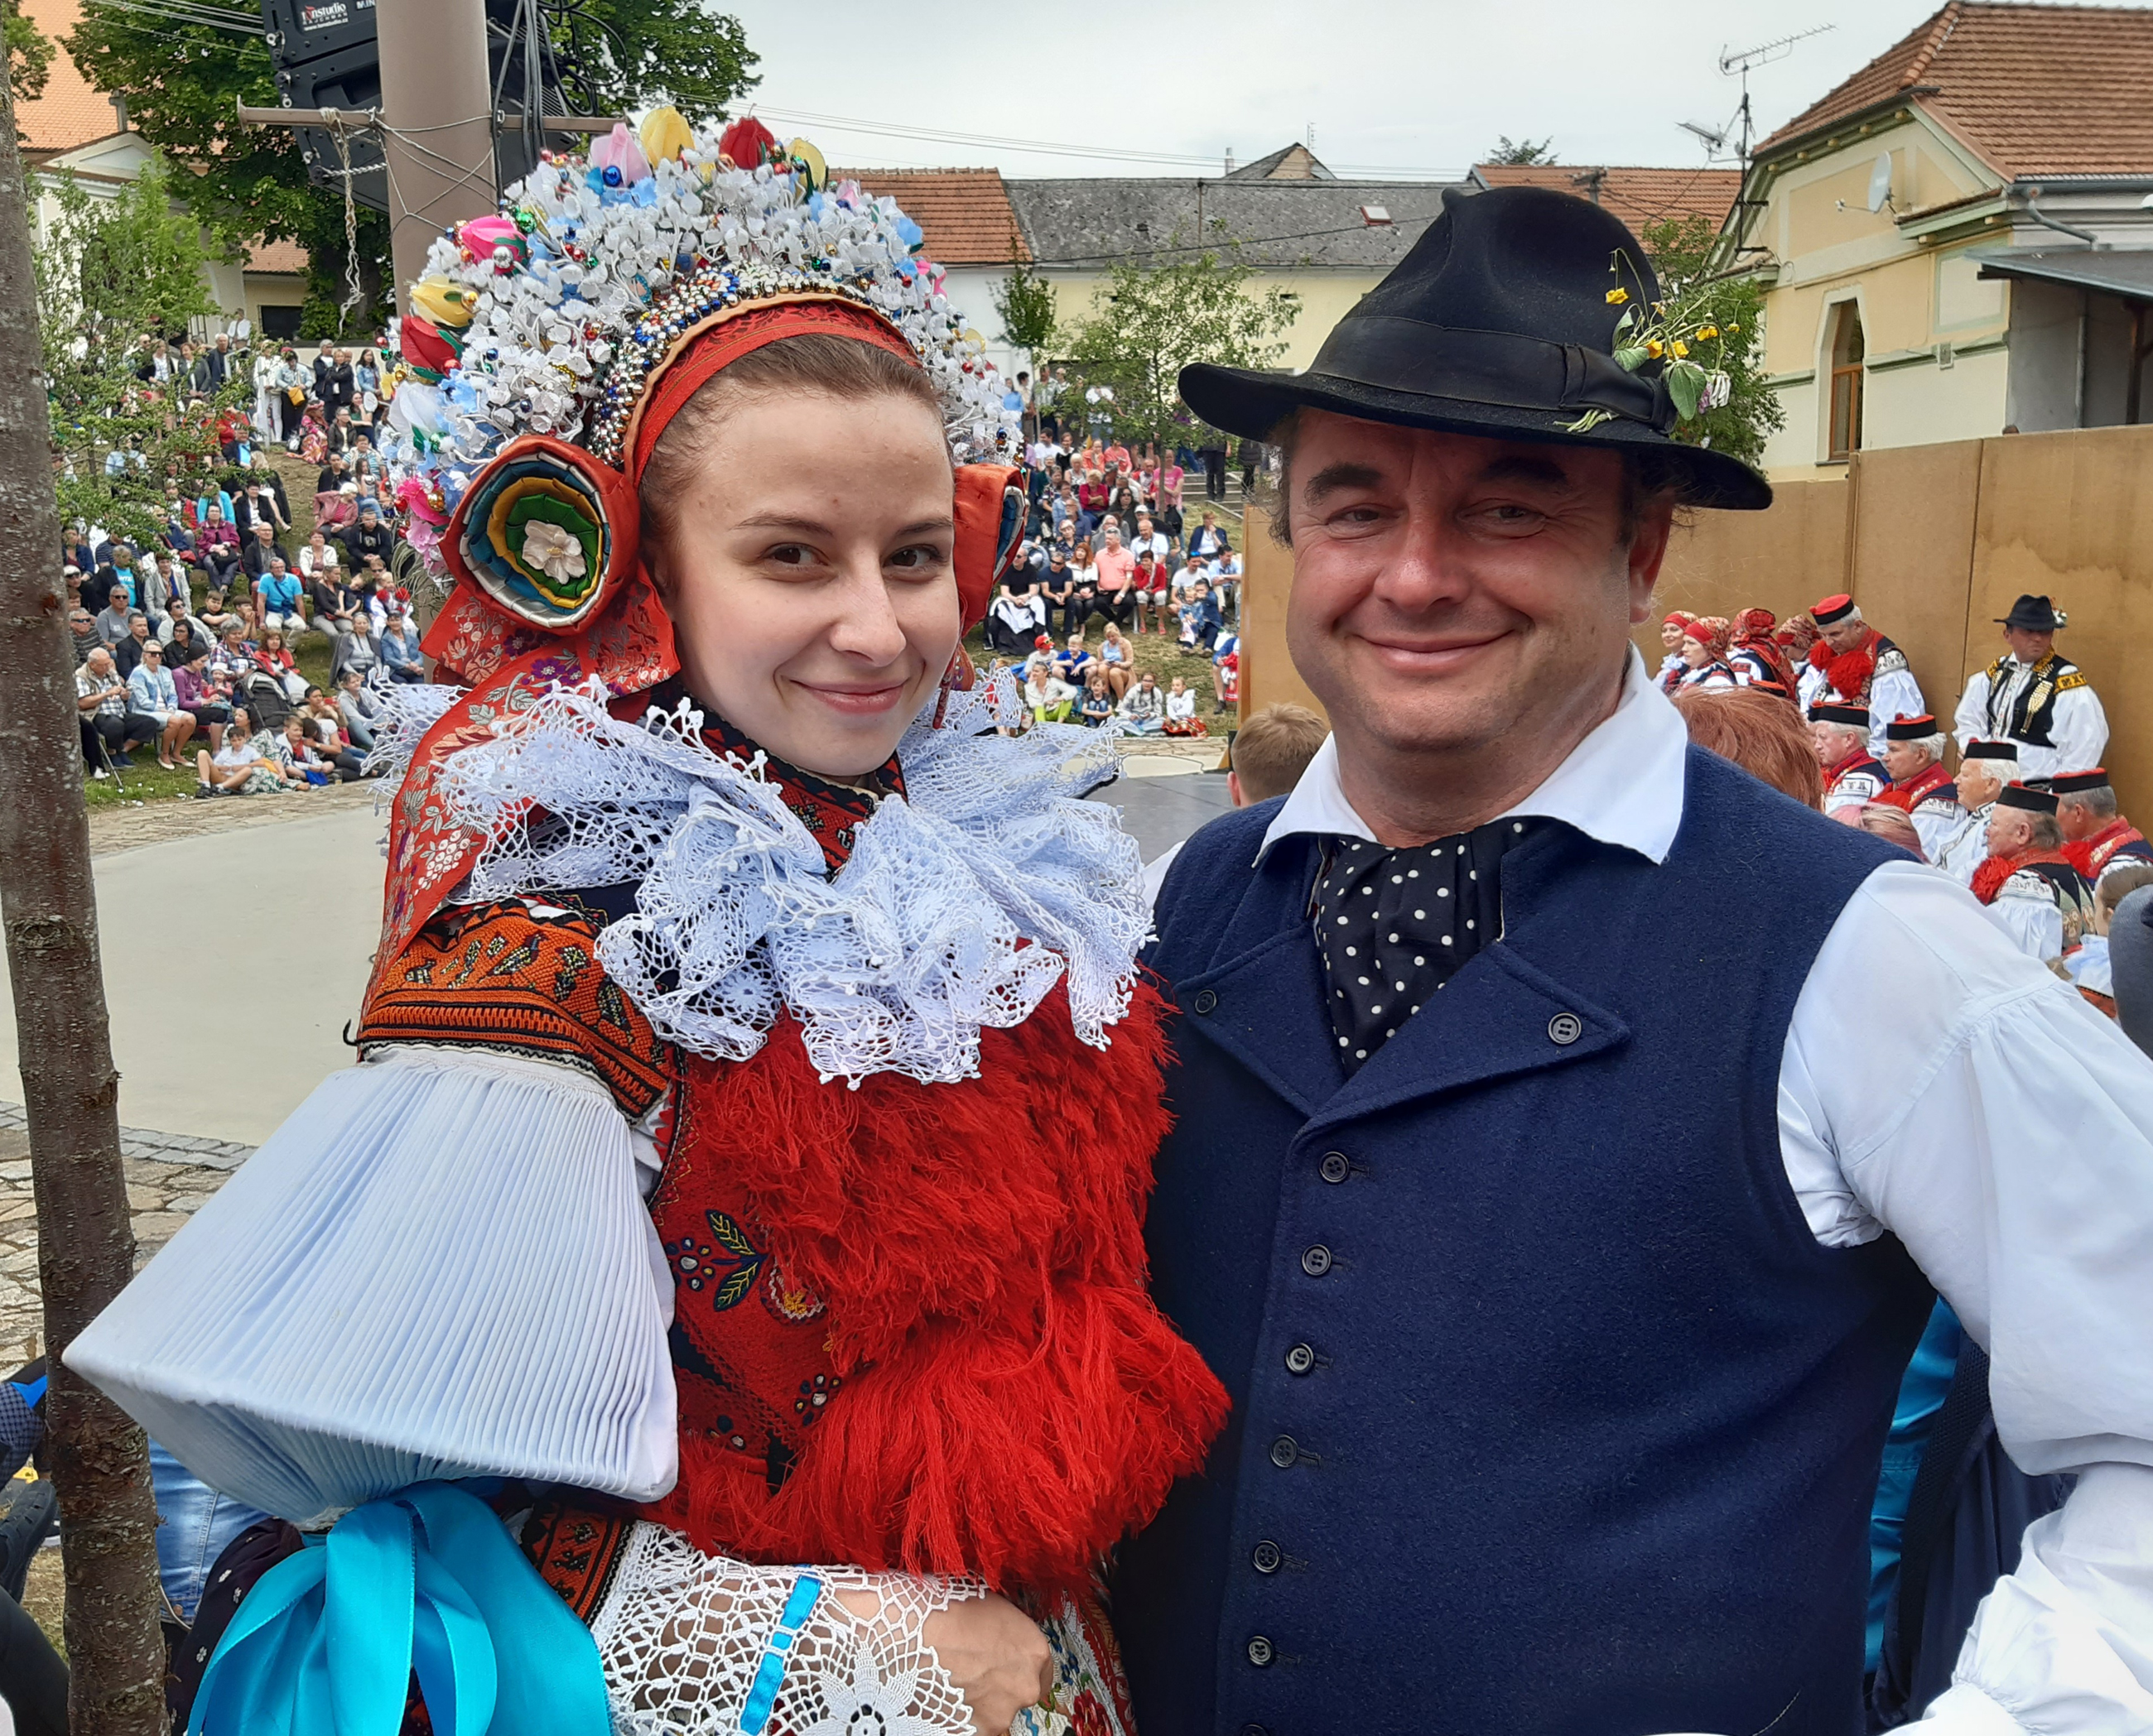 Two of the villagers show off the colourful costumes that have helped make the Ride of the Kings event a UNESCO intangible heritage festival (Chris Wiltshire/PA)